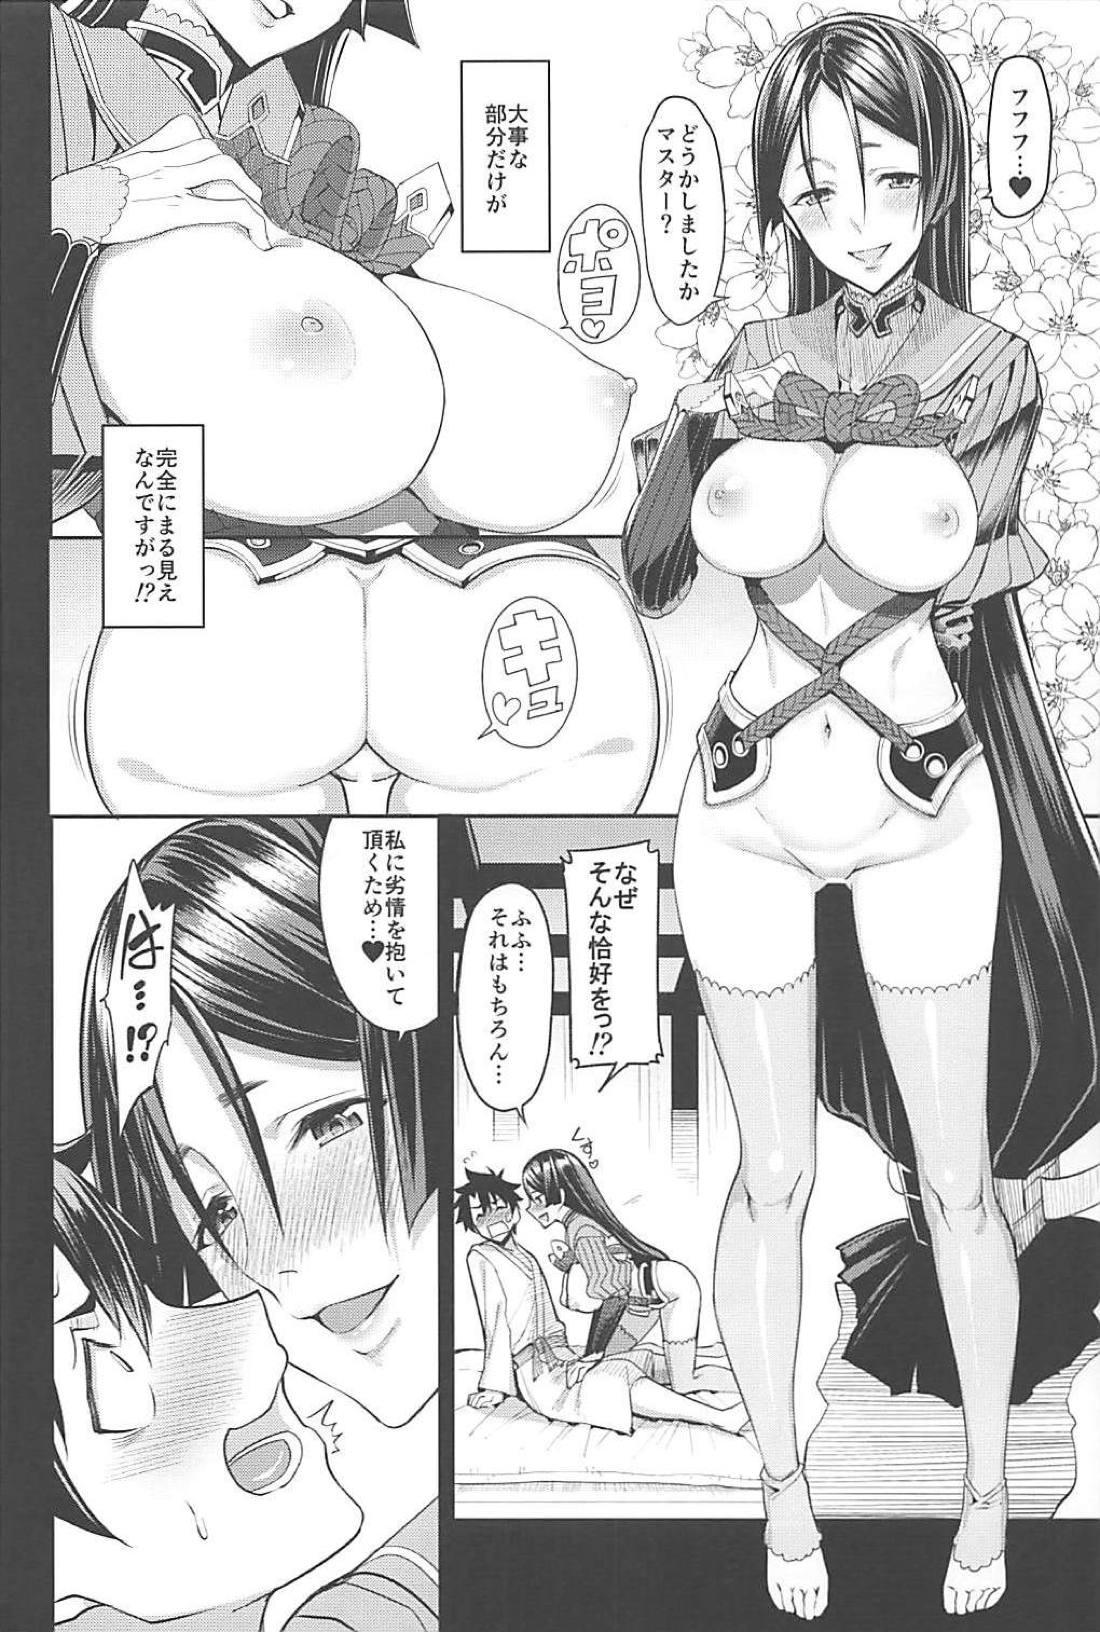 Mouth Another Personality - Fate grand order Amazing - Page 5